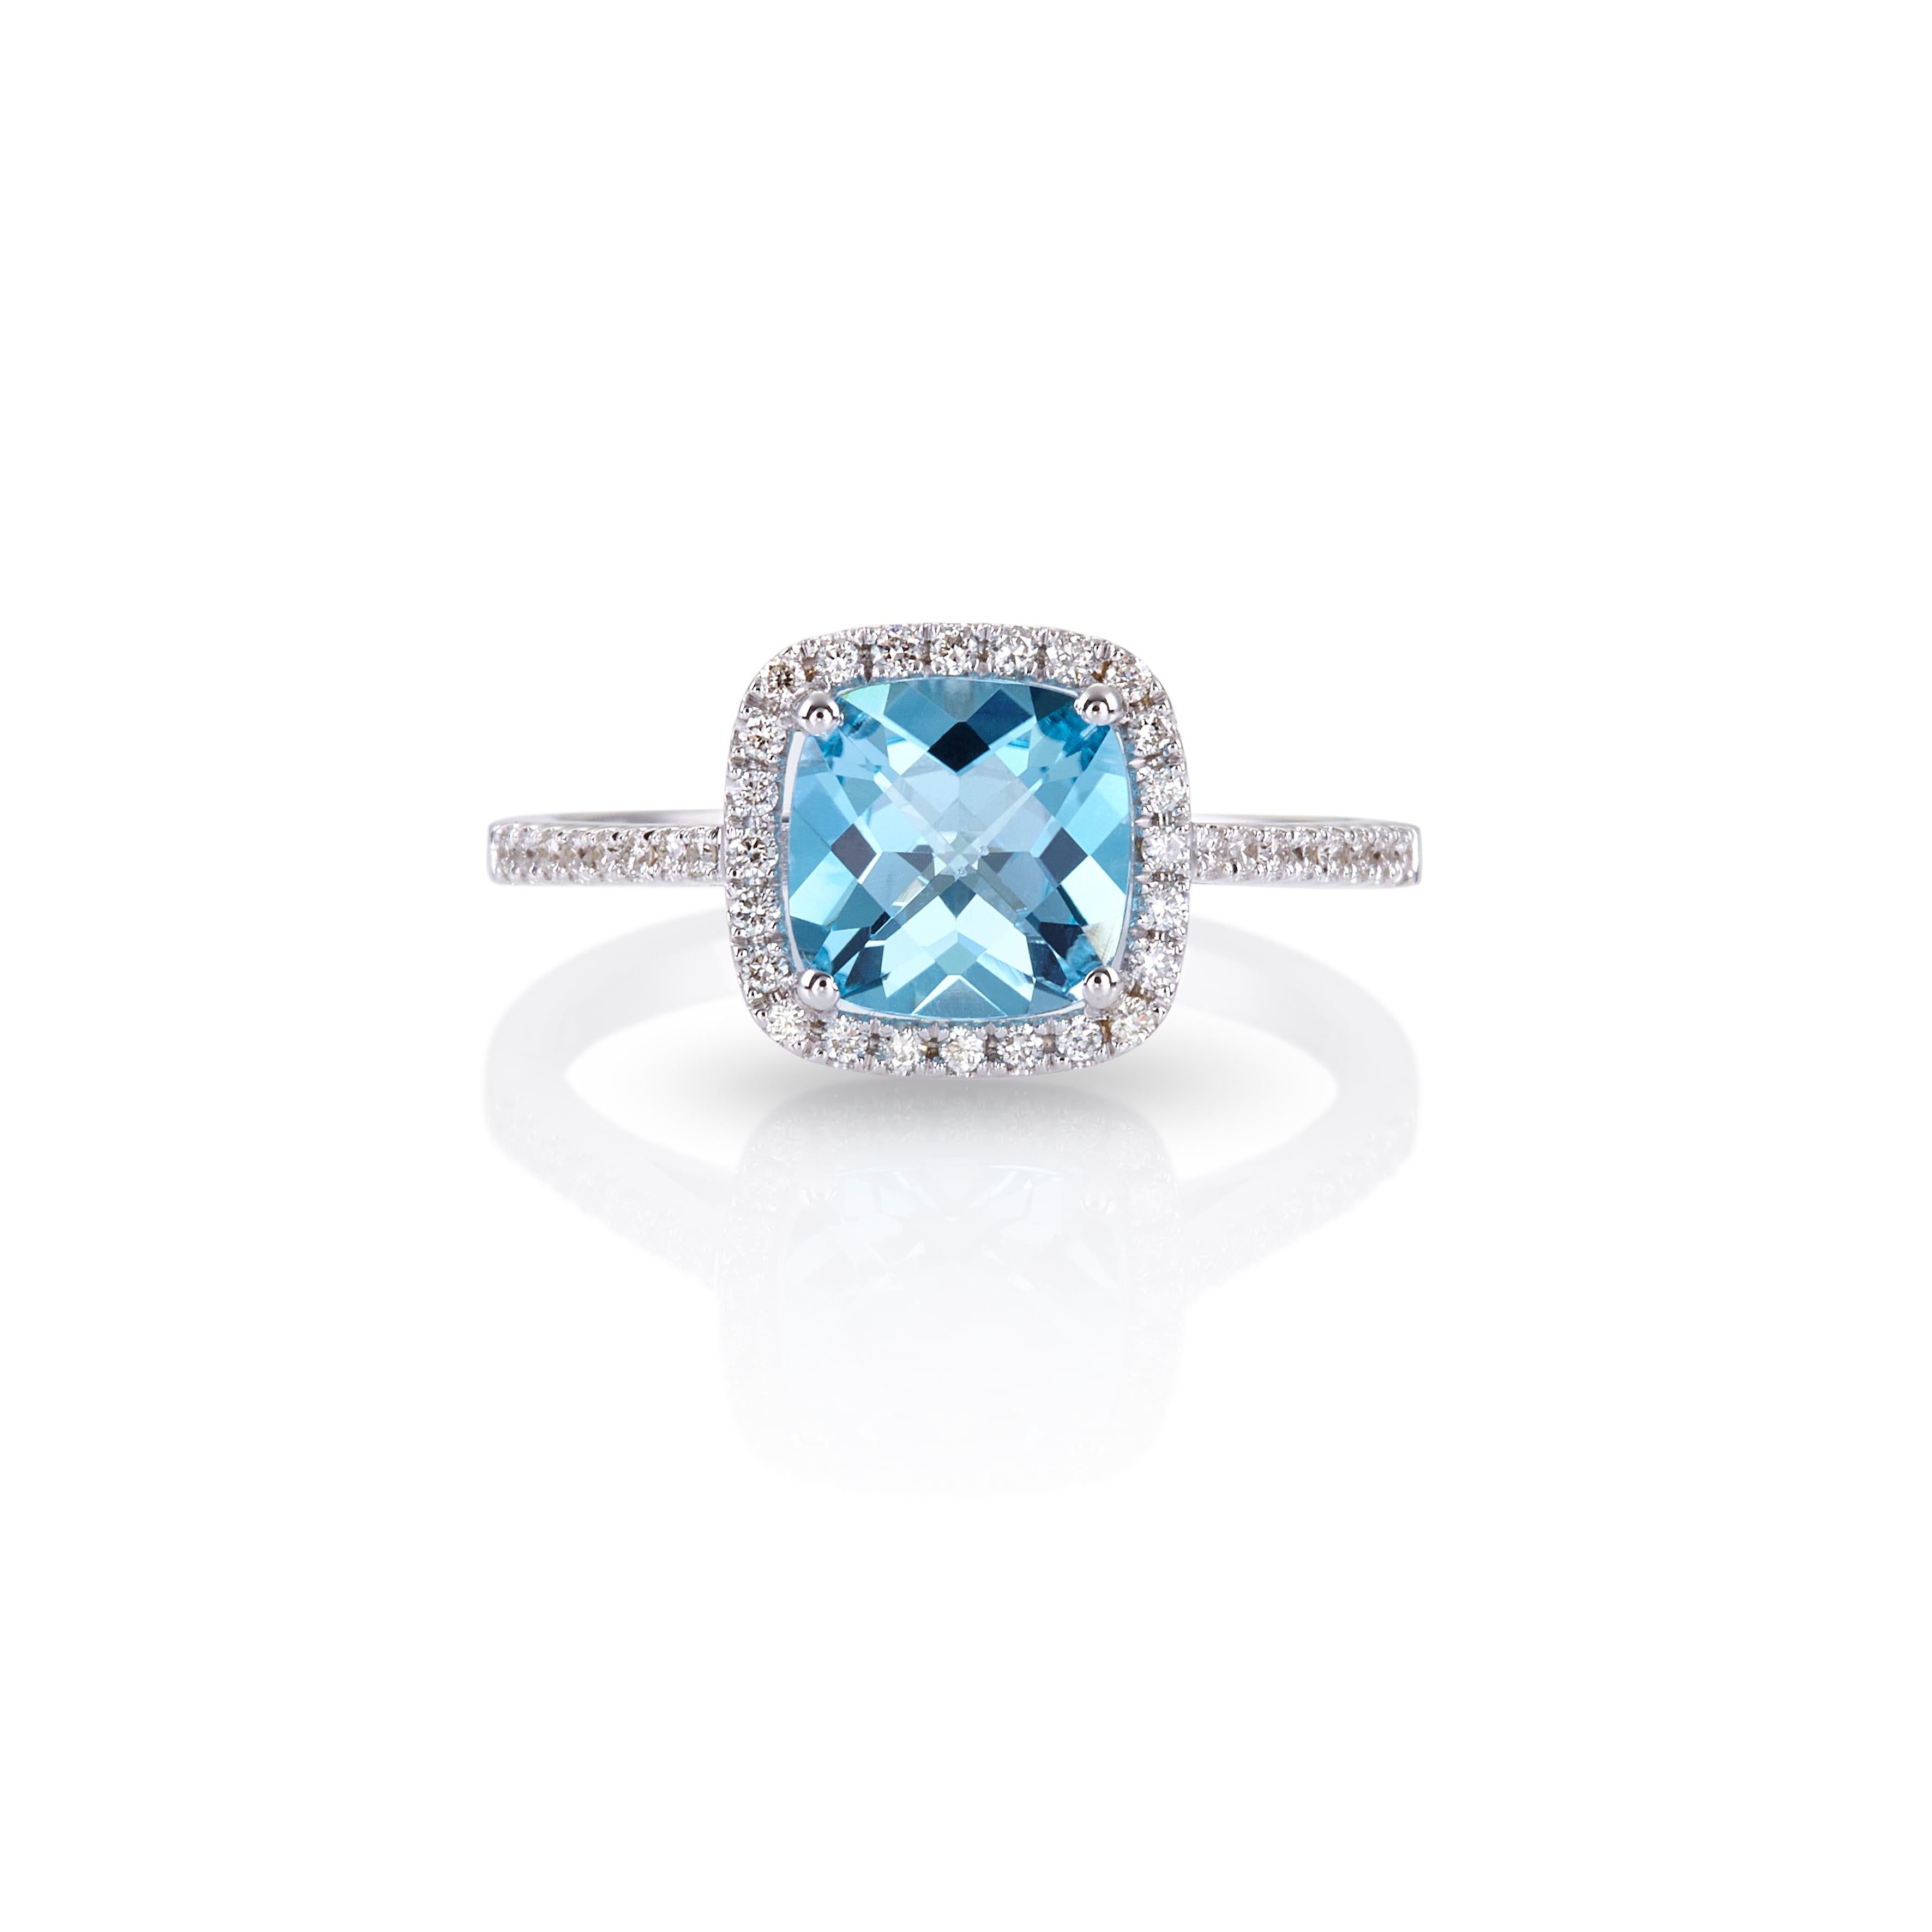 For Sale:  18kt White Gold Ring Cushion Cut Blue Topaz 1.80ct and Micro Pave Diamonds Halo 2